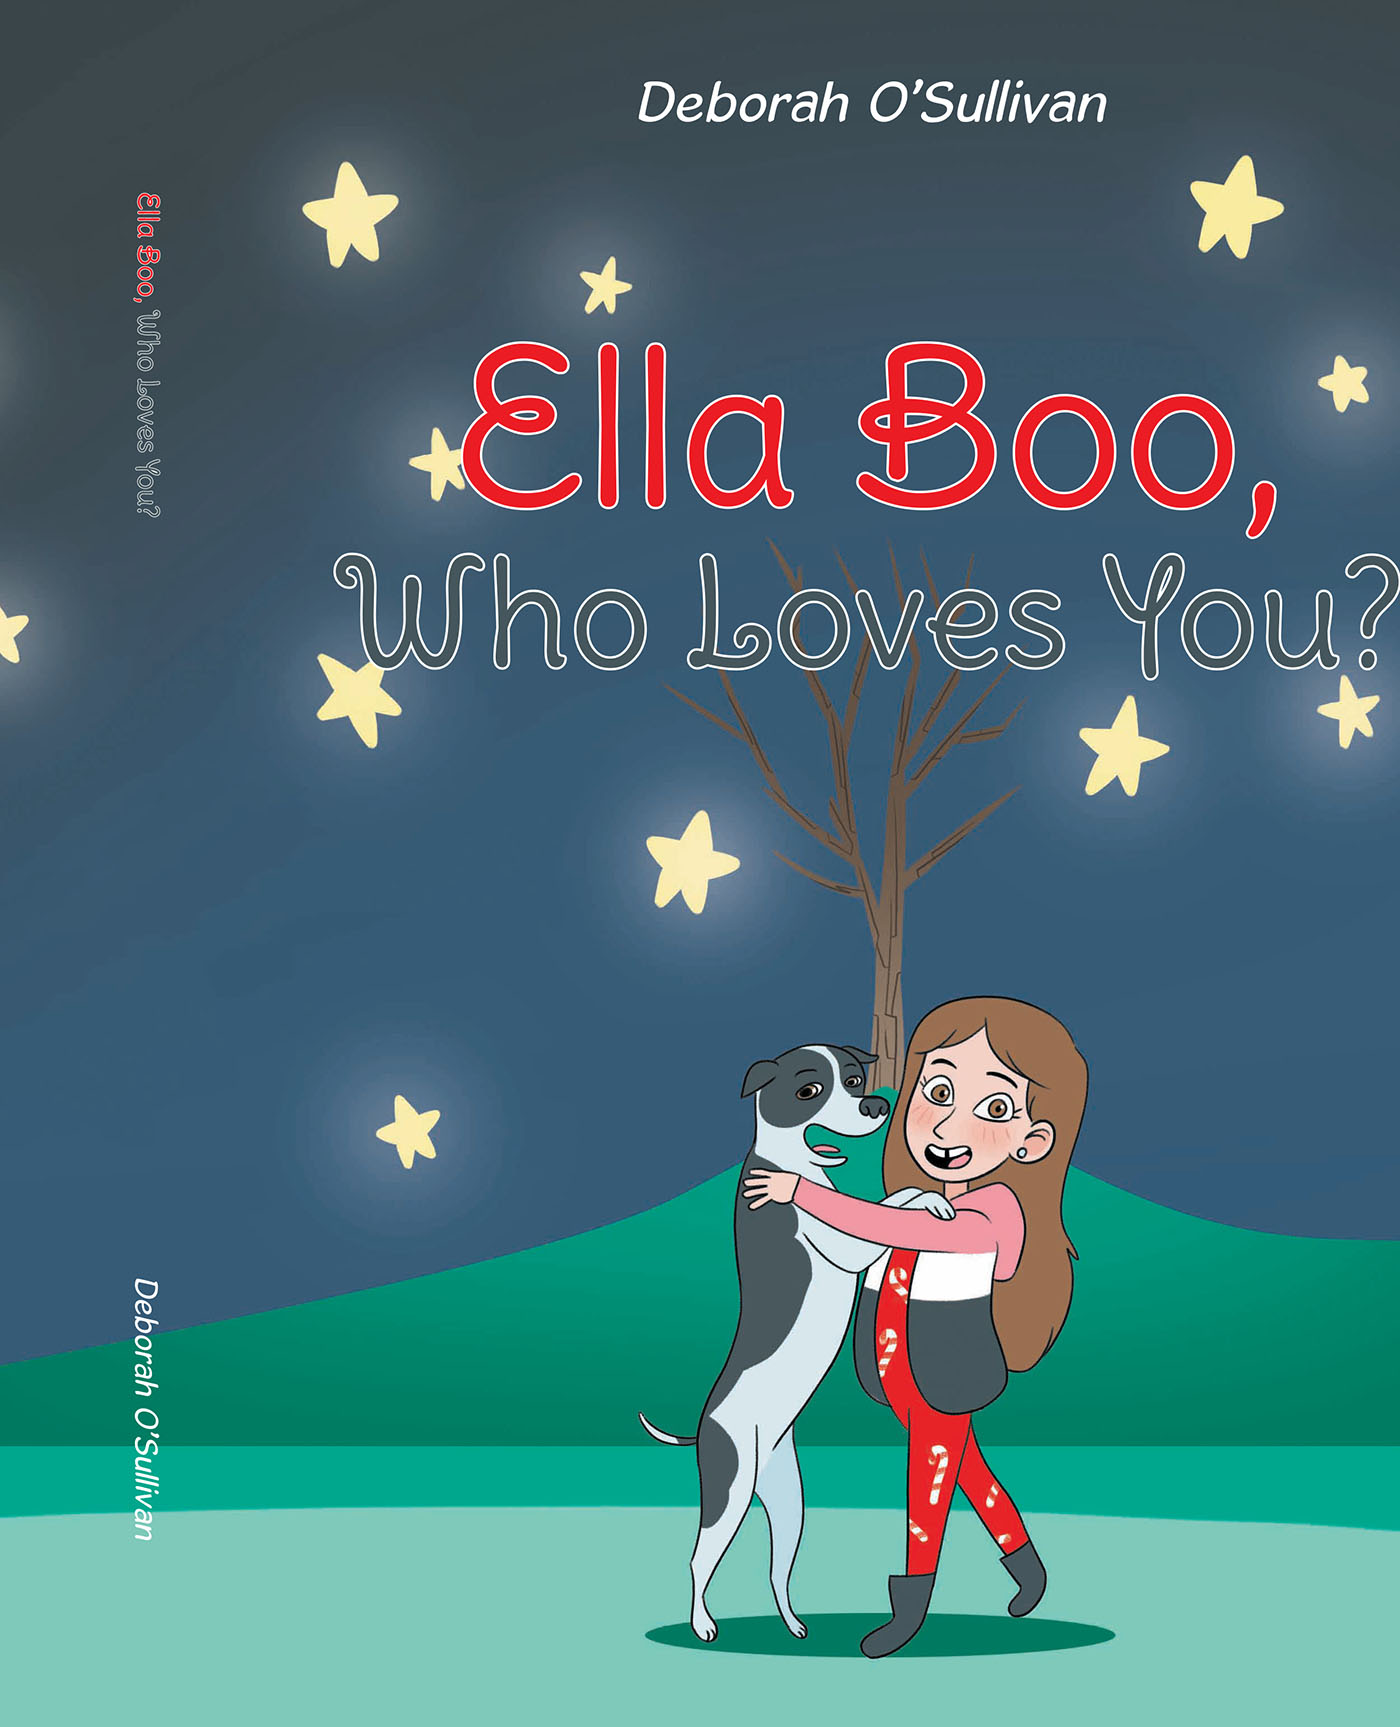 Author Deborah O’Sullivan’s New Book, “Ella Boo, Who Loves You?” is a Charming Children’s Story Celebrating the Bonds of Love Between a Little Girl and Her Family